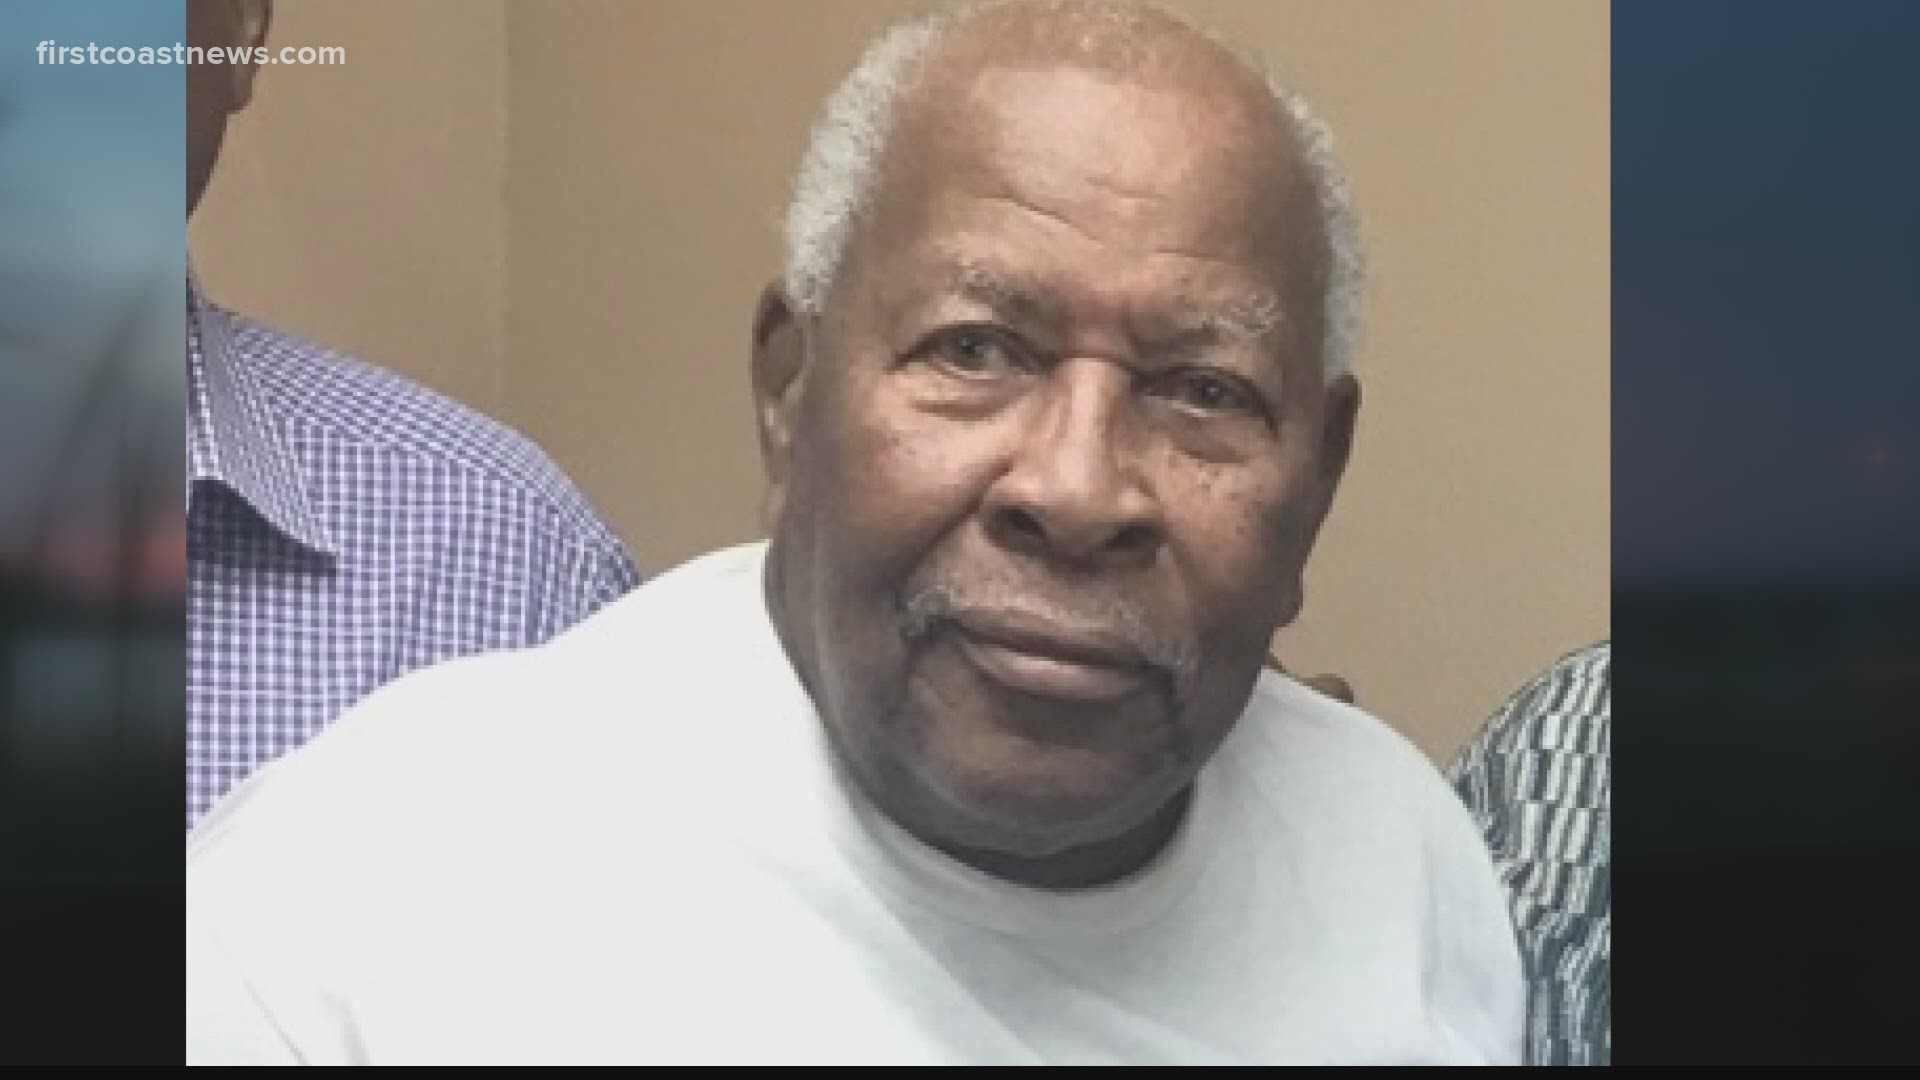 Jacksonville Civil Rights icon dies, some colleagues promise to keep work  going 